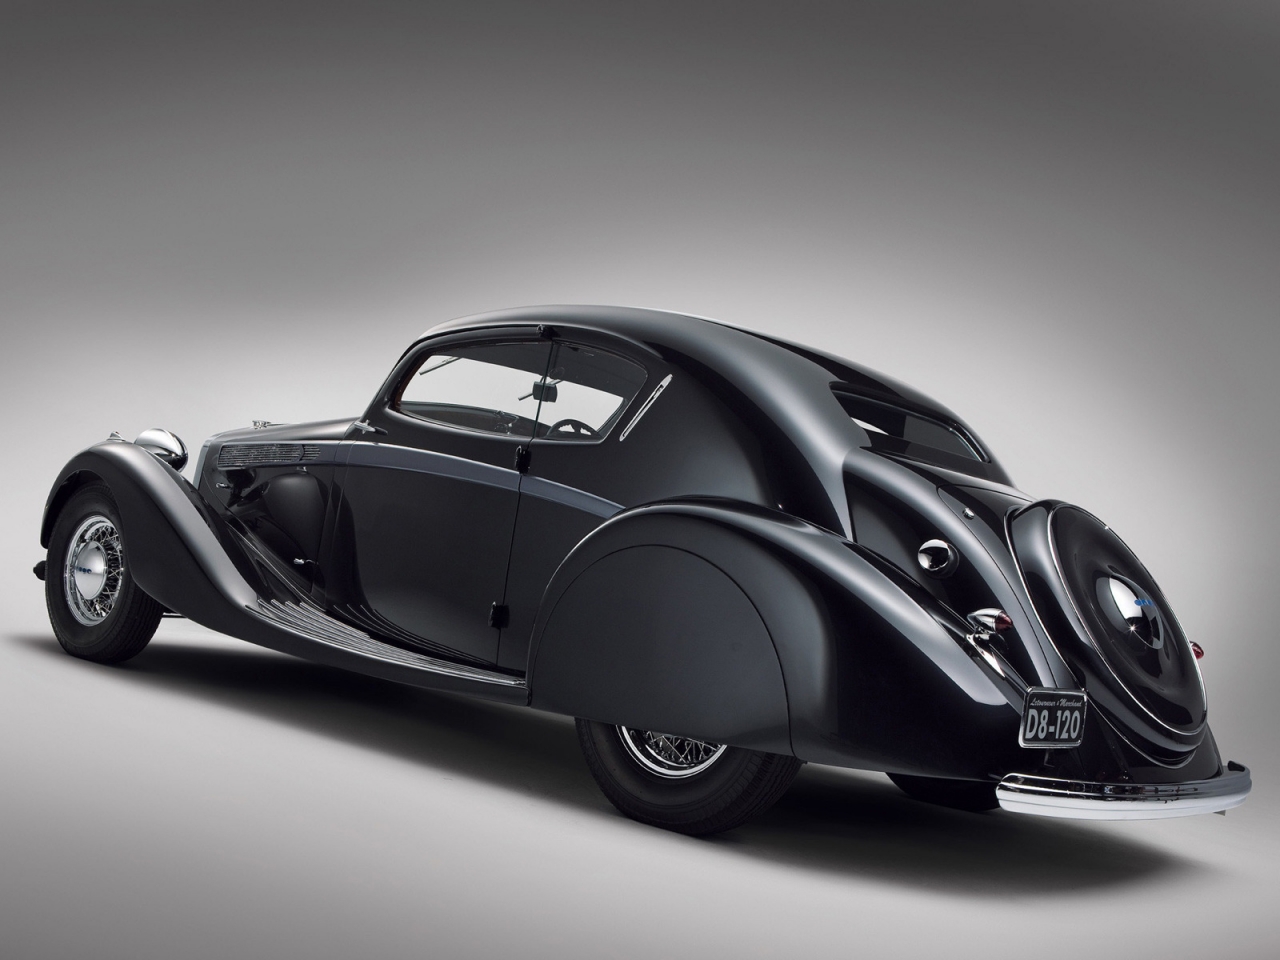 Delage D8 120 Aerosport Coupe for 1280 x 960 resolution